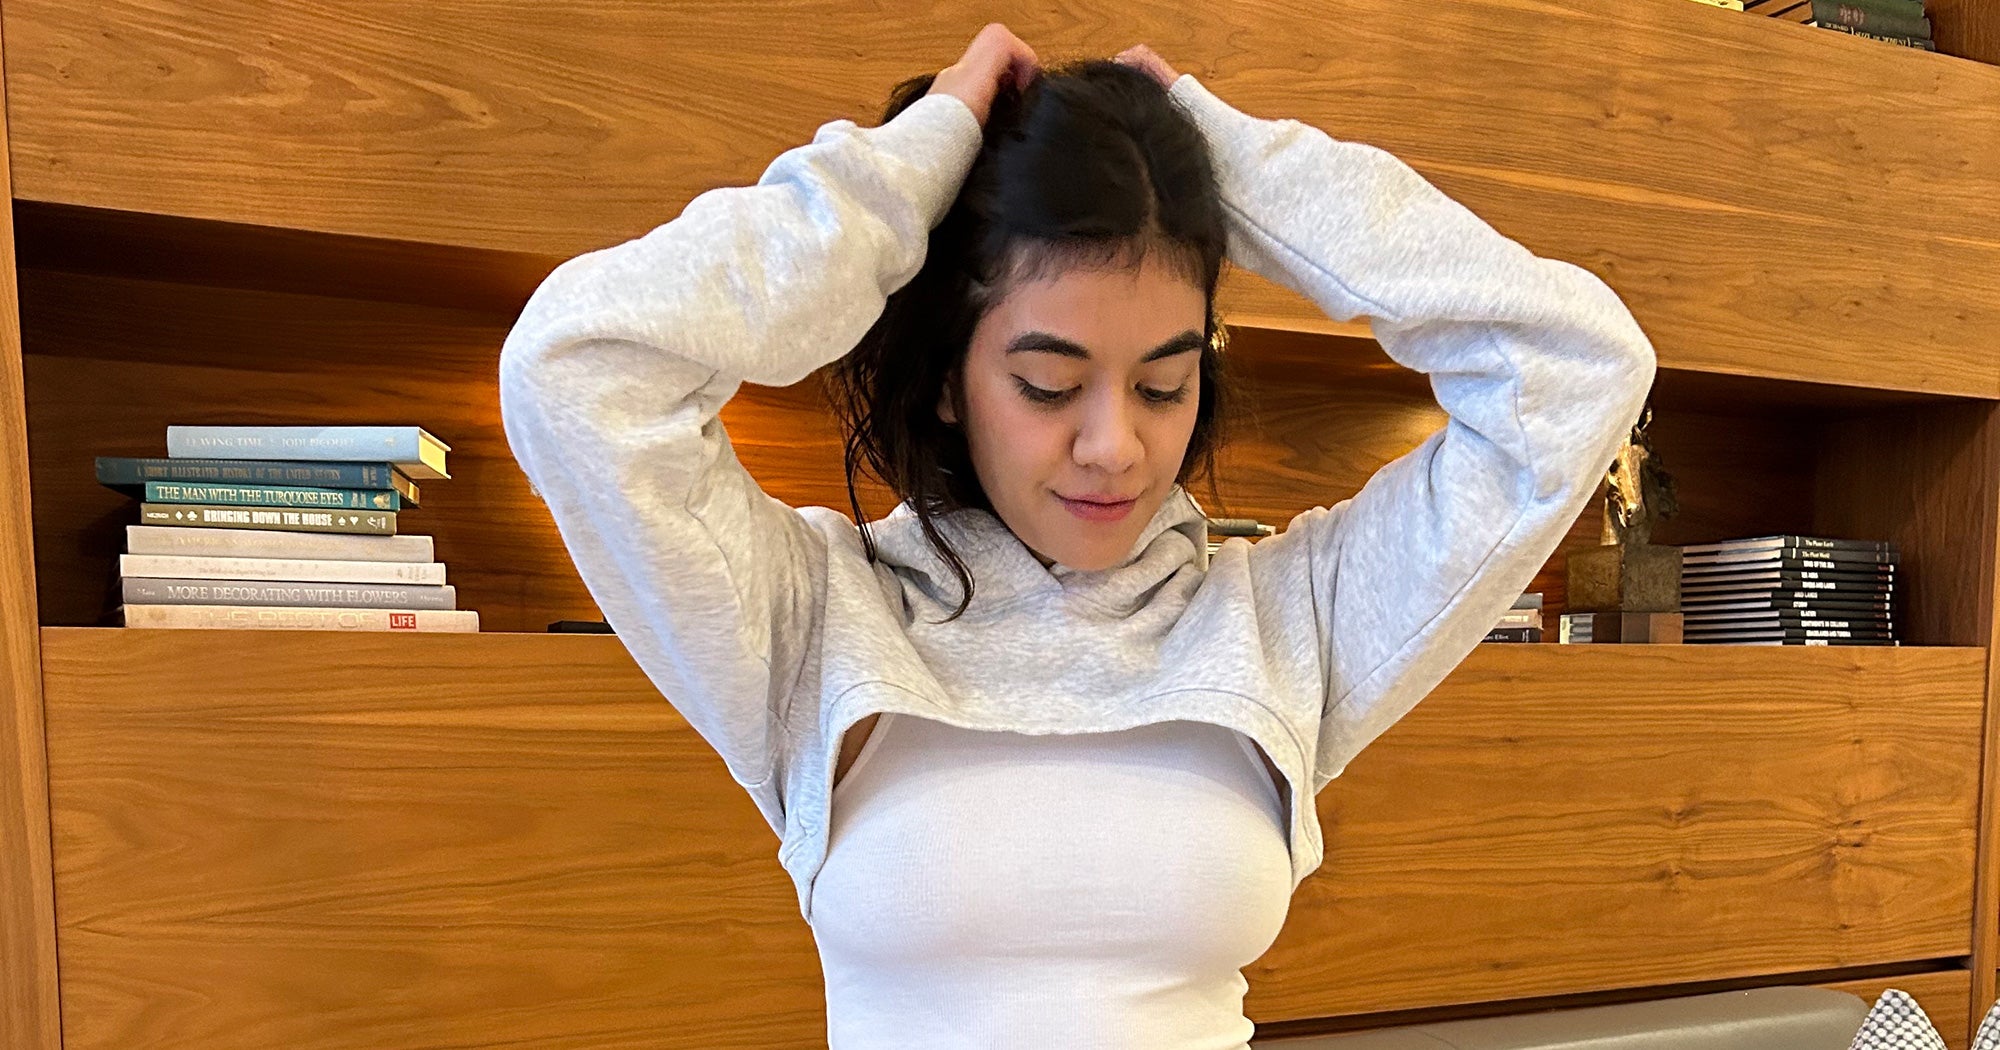 Is Khy Worth A Try? Our Team Review Kylie Jenner’s Newest Drop